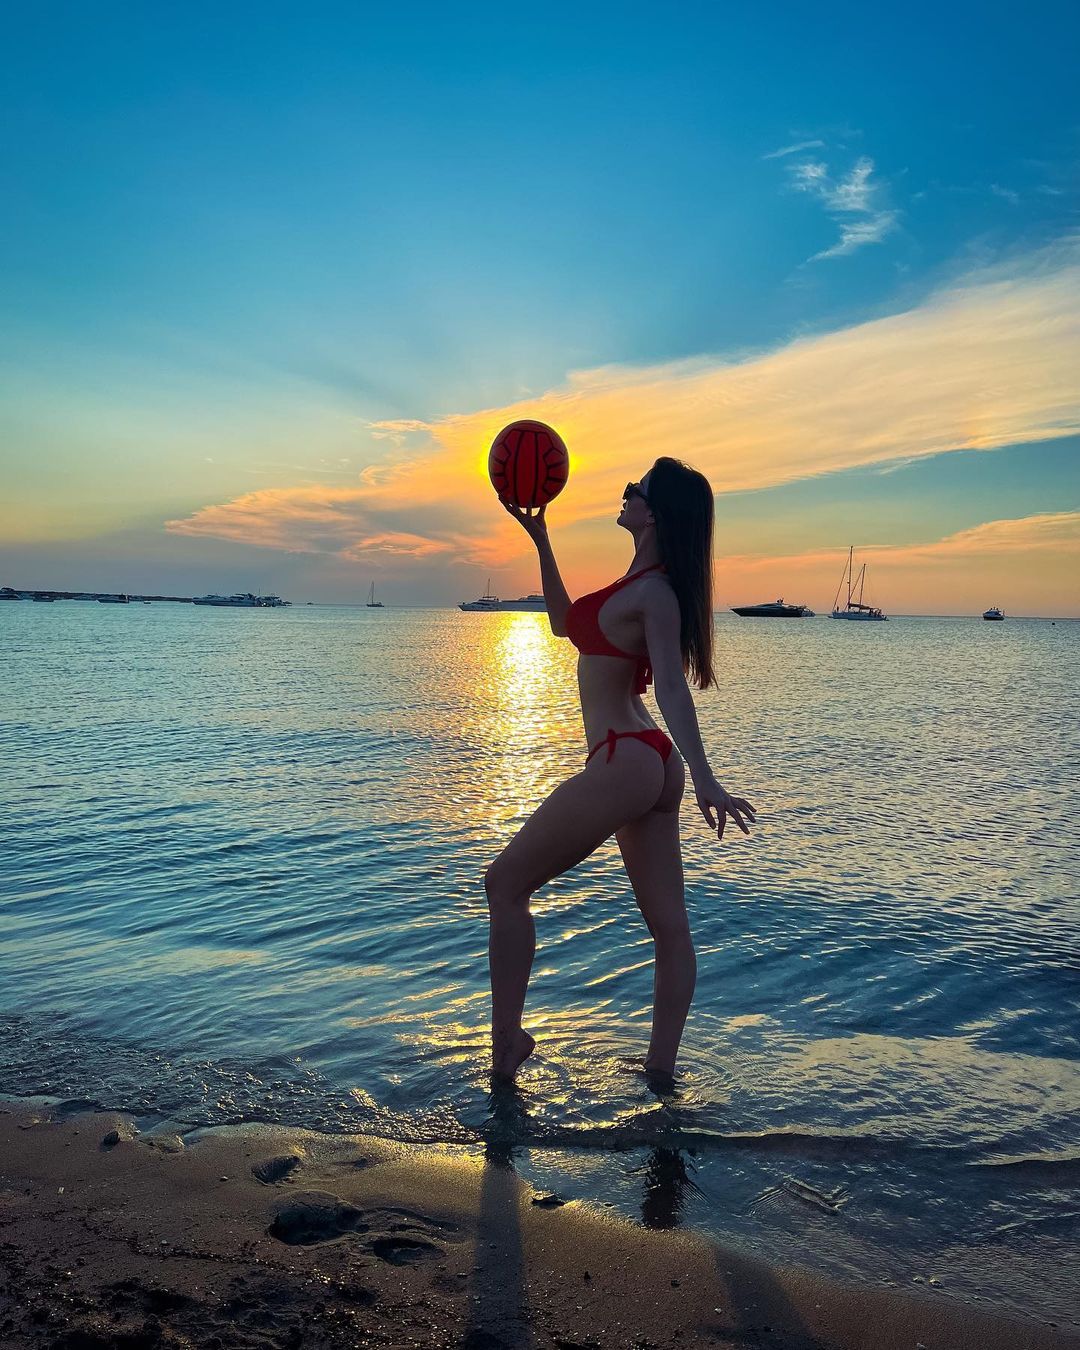 Giorgia Andriani strikes a pose with a football in hand during sunset hours